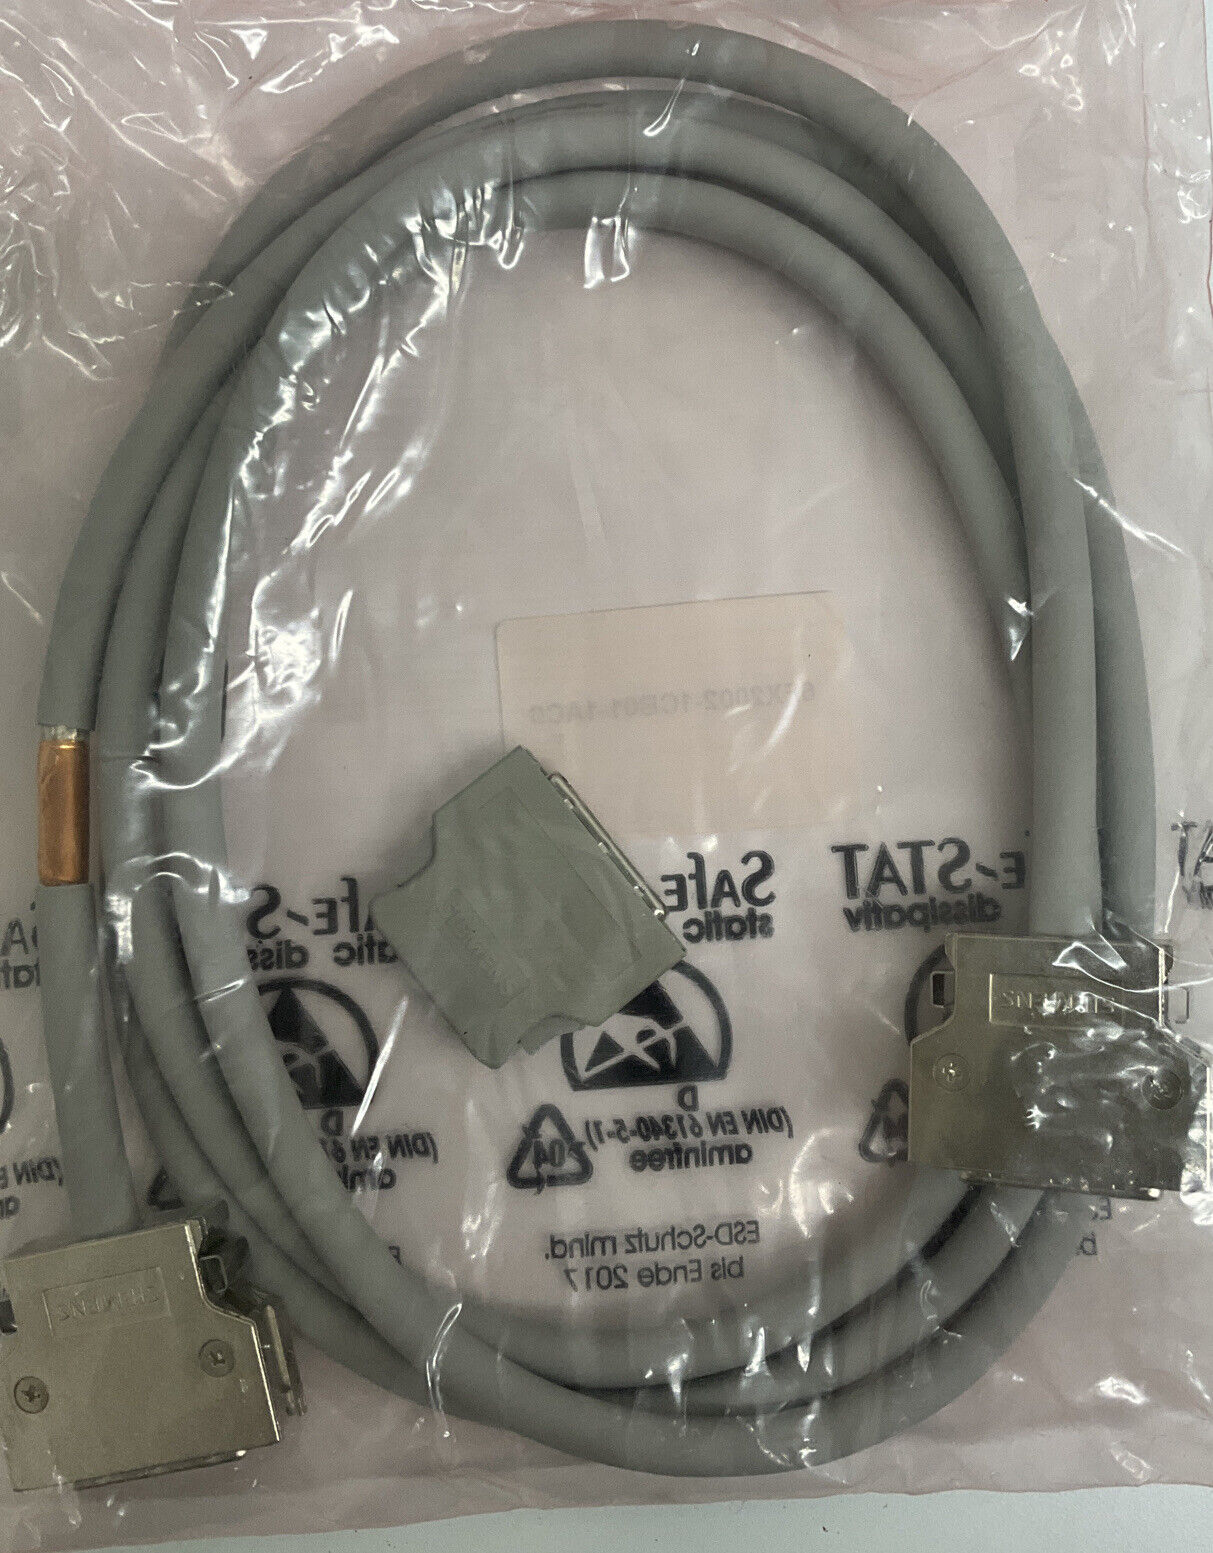 Siemens 6FX2002-1CB01 - 1AC0 Preassembled Signal Cable 2 Meter (BL208) - 0